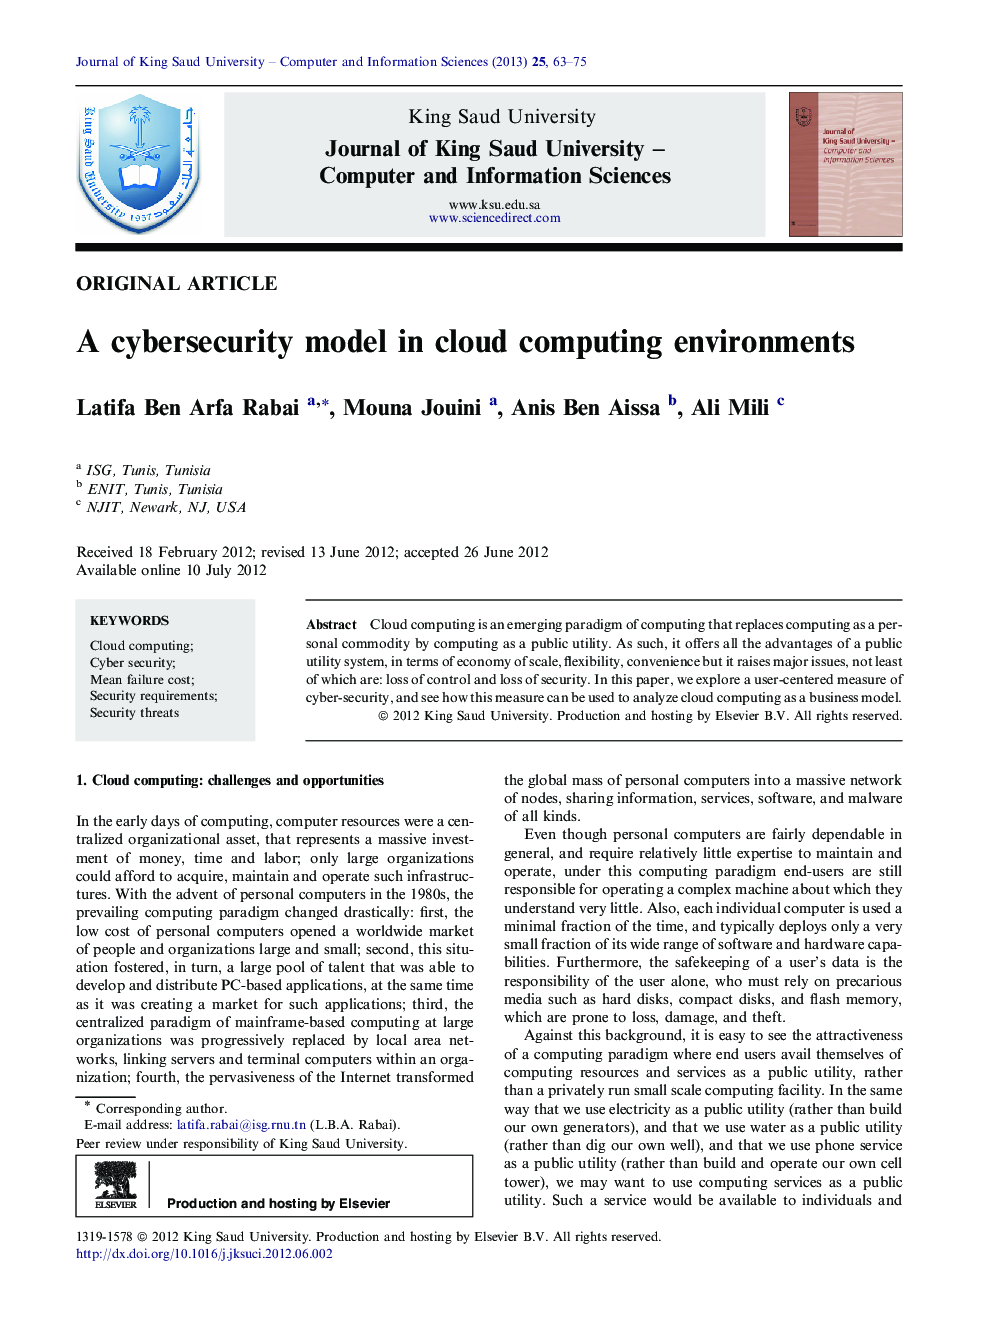 A cybersecurity model in cloud computing environments 